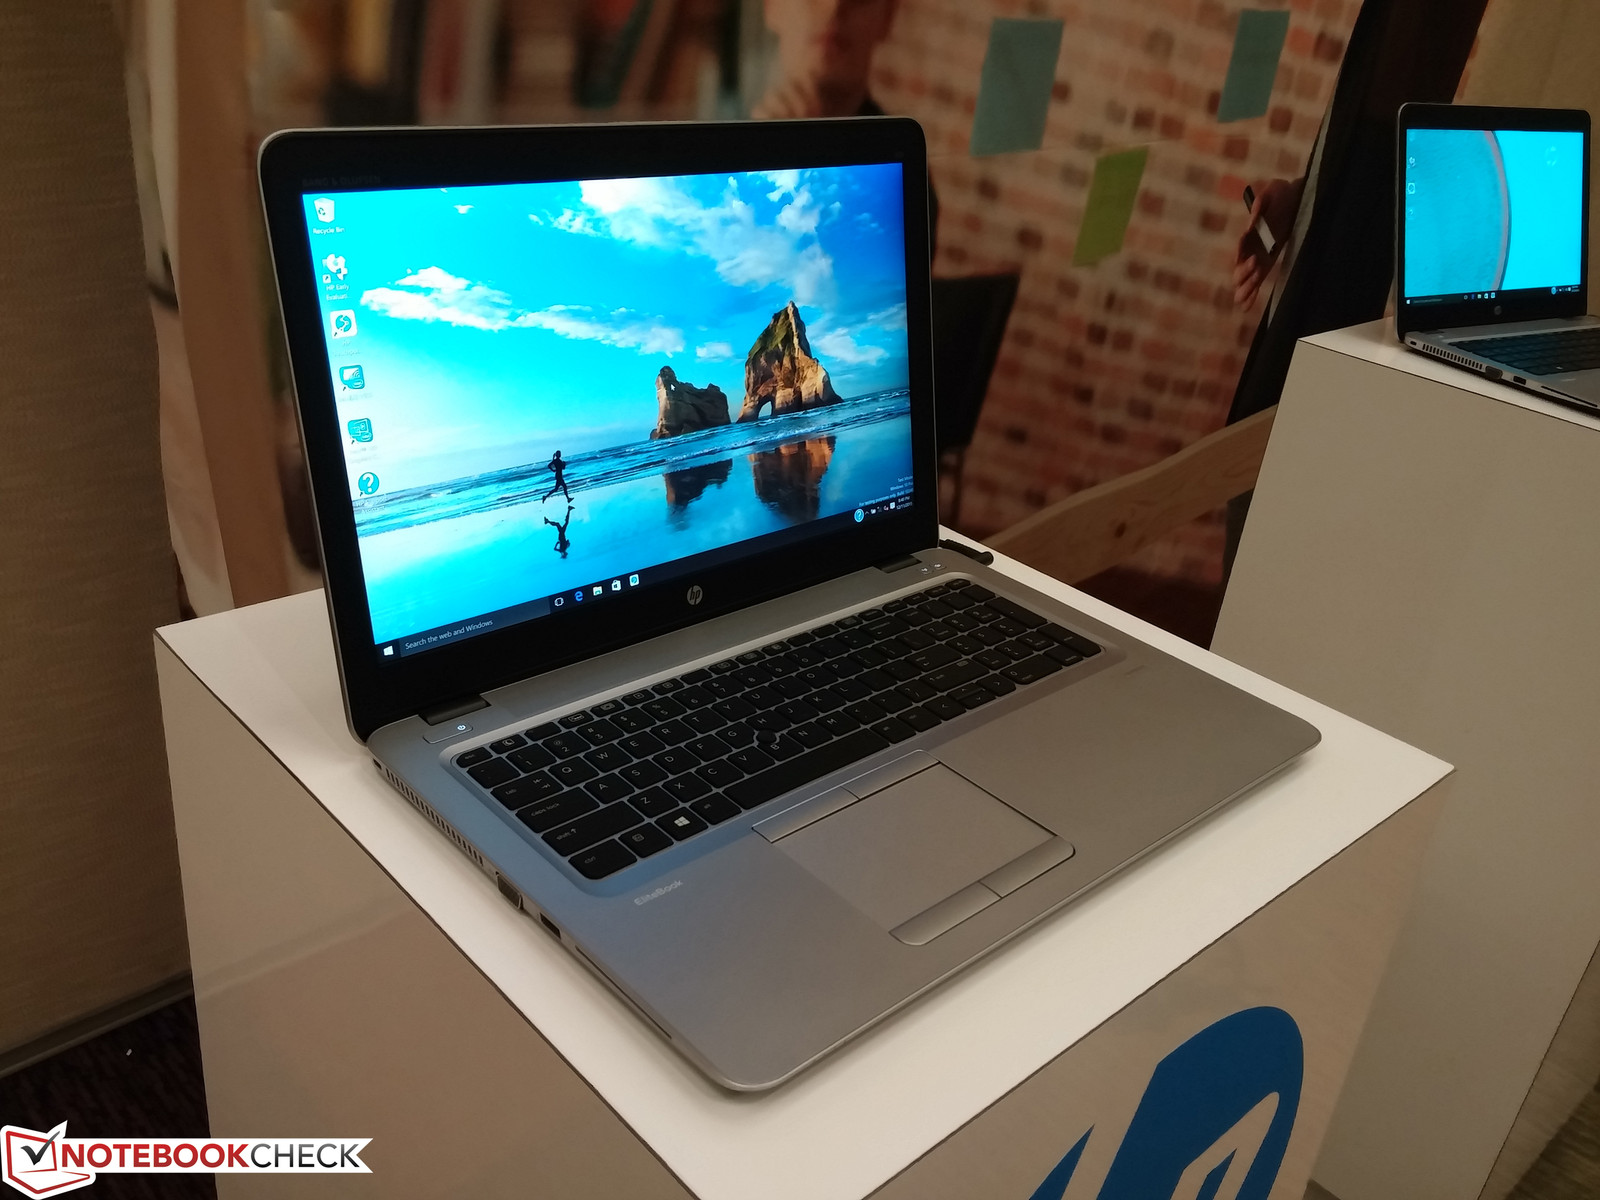 HP refreshes EliteBook 800 series with the 820, 840, and 850 G3 - NotebookCheck.net News